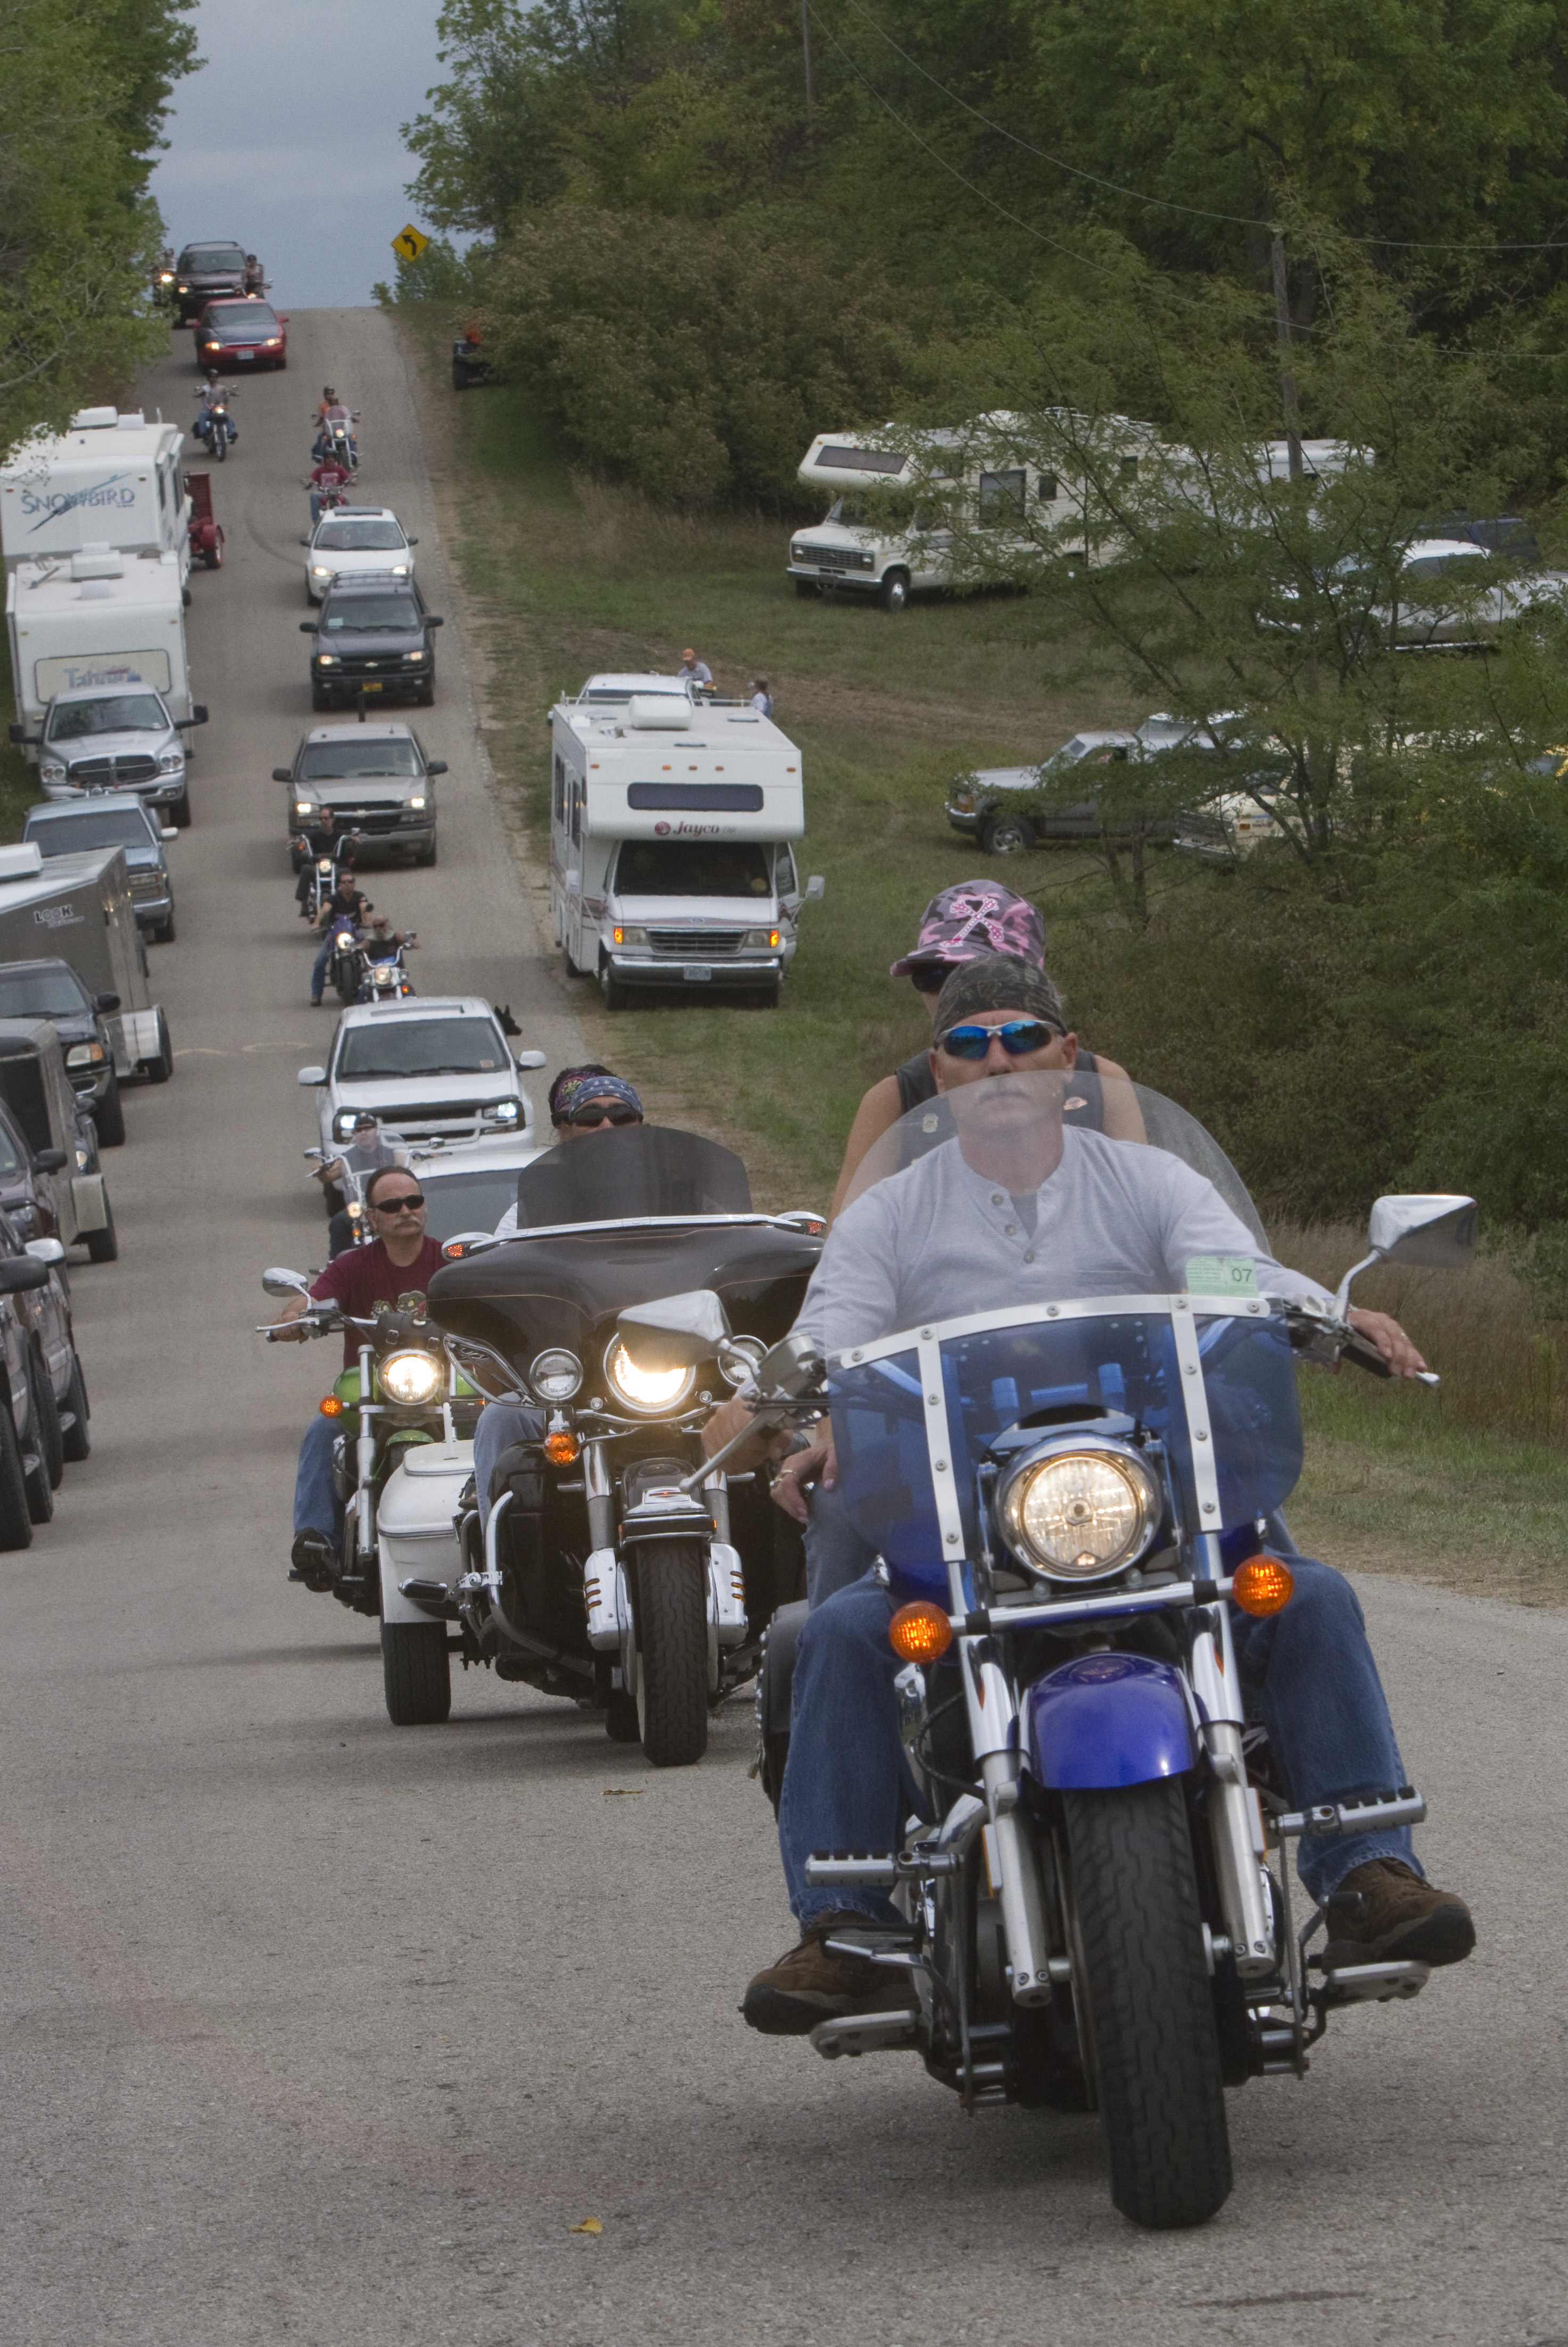 christine lunsford recommends lake perry kansas bike rally 2020 pic